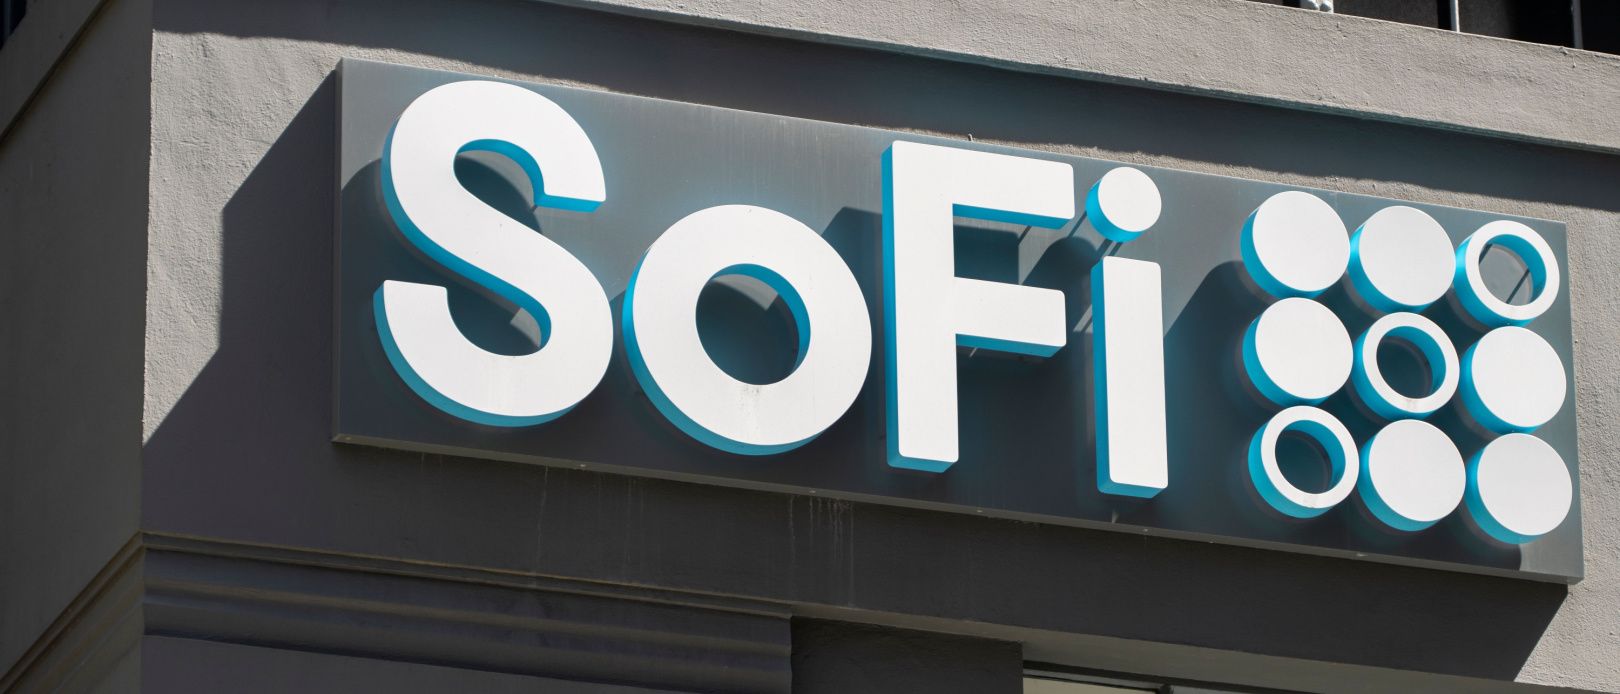 SoFi Technologies, Inc. is an American online personal finance company and online bank.